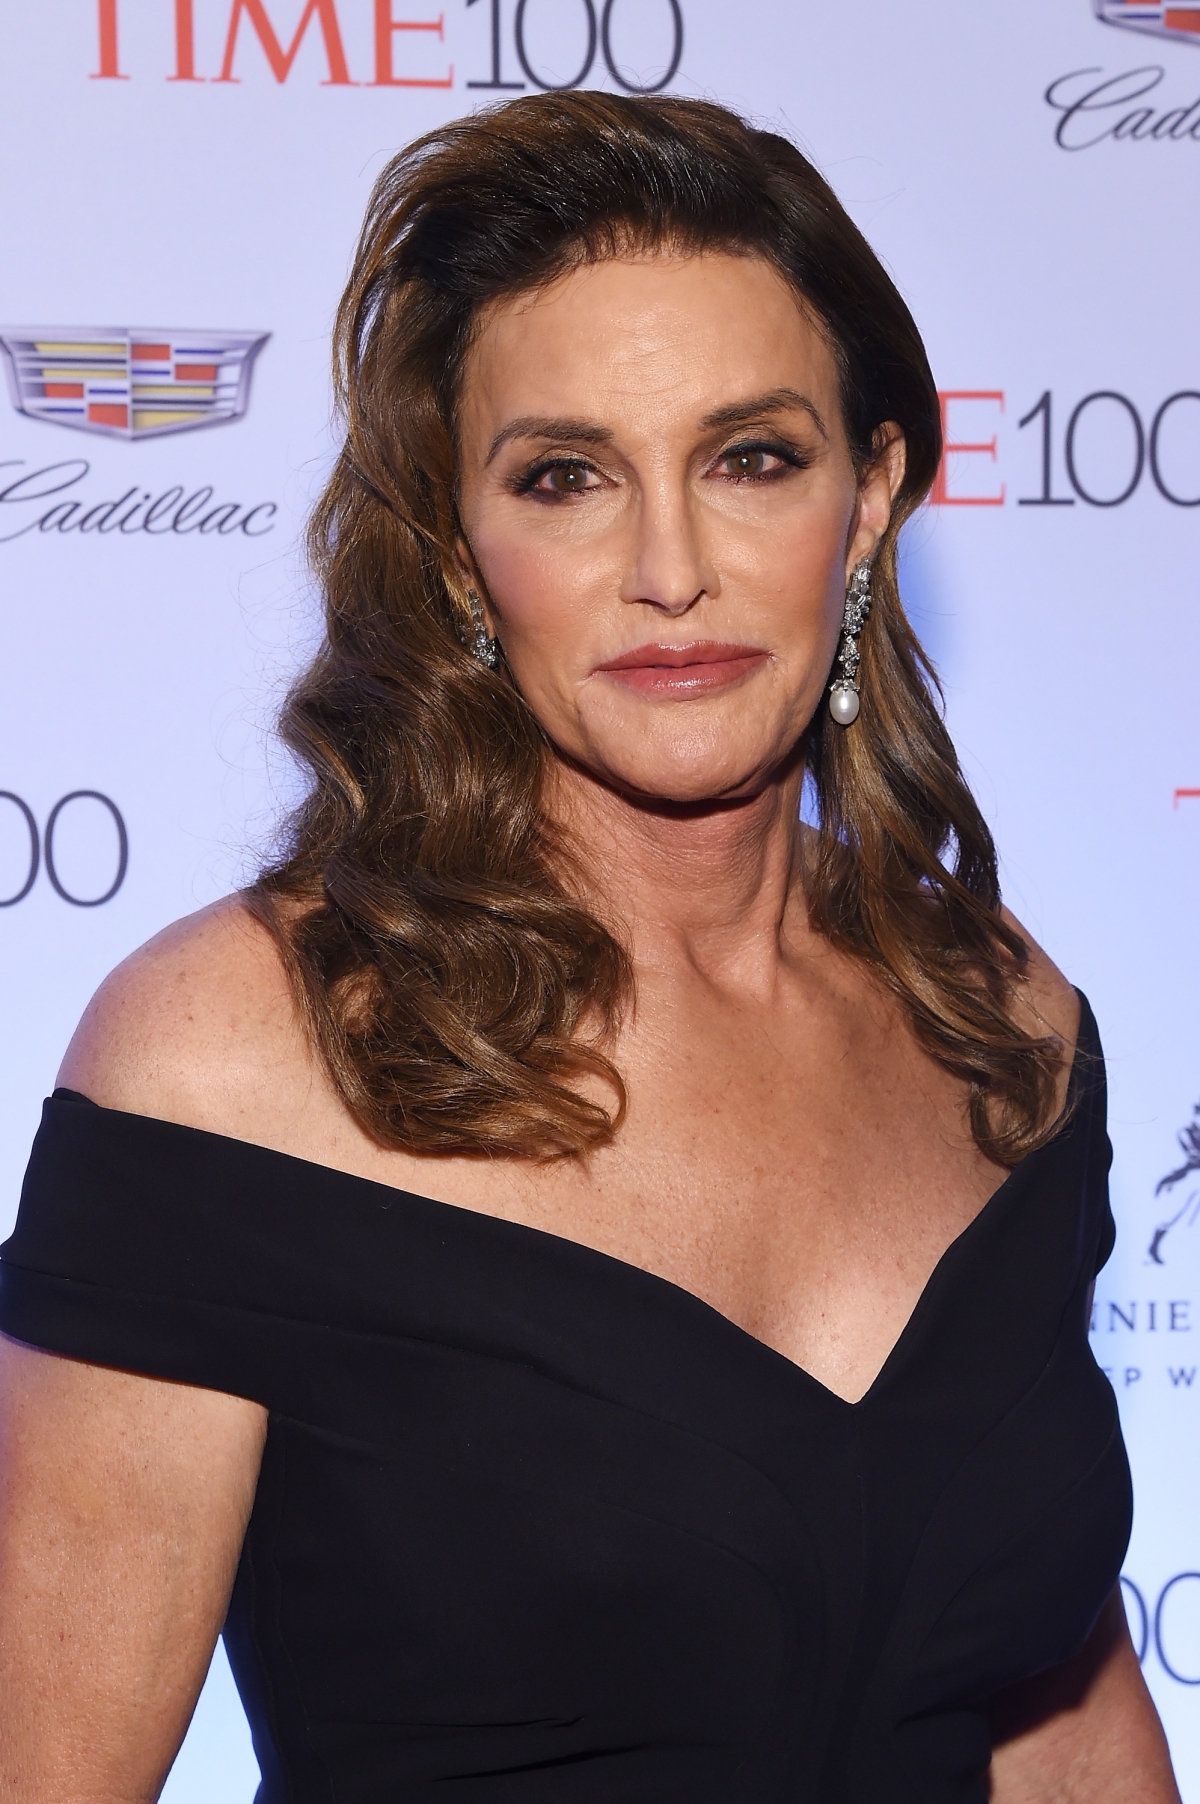 I Am Cait Viewers react to Caitlyn Jenner's axed reality show